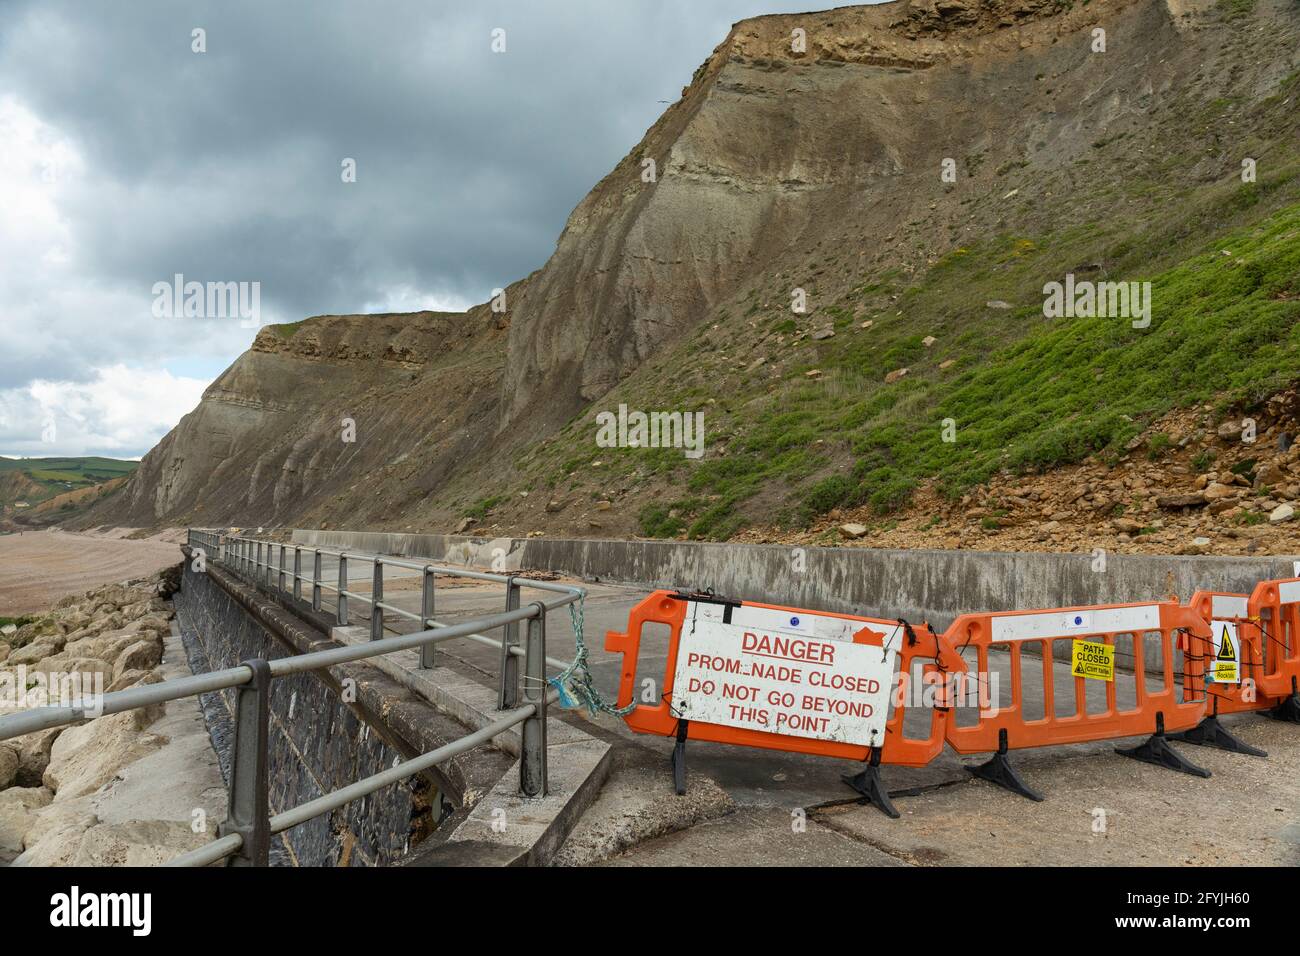 Warning sign alerting that the promenade coastal path is closed due to Danger to the public of rock falls. West Bay, Dorset, England, UK Stock Photo